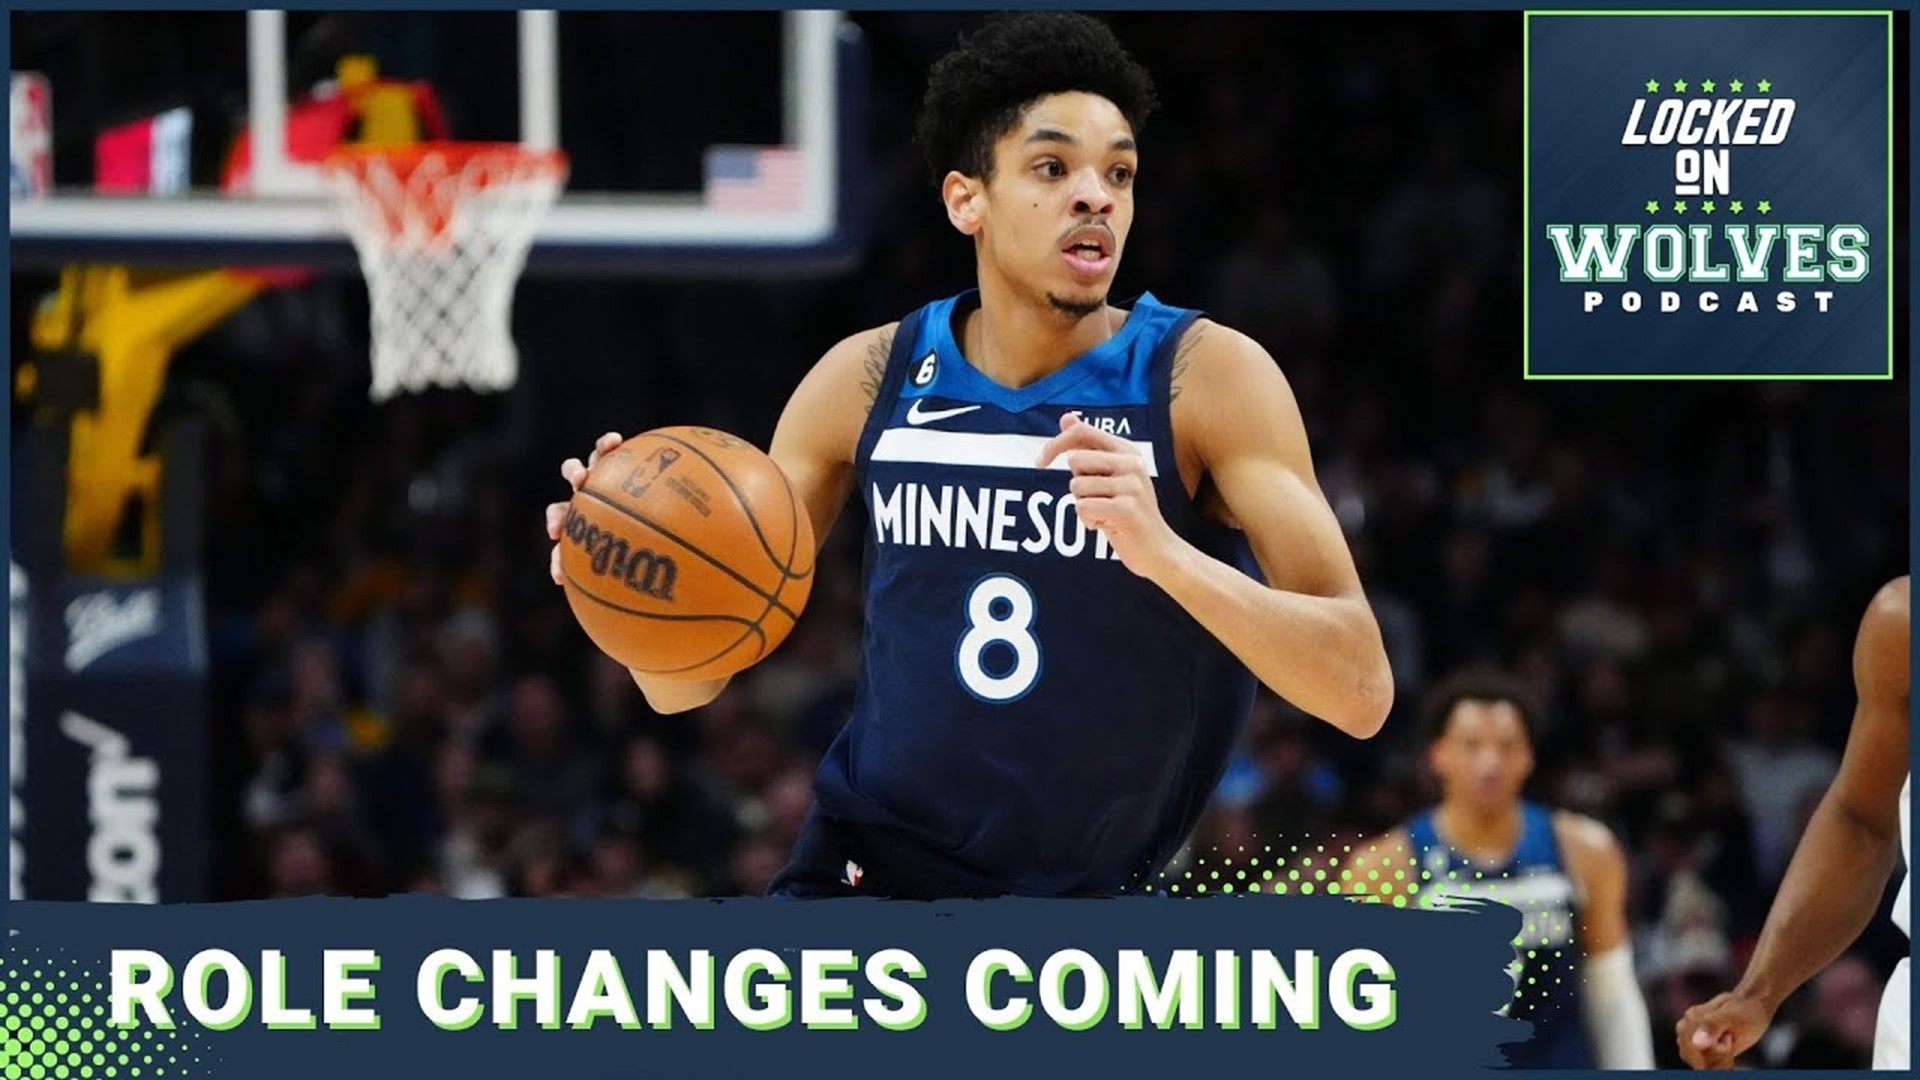 2 Minnesota Timberwolves players who will have role changes next season